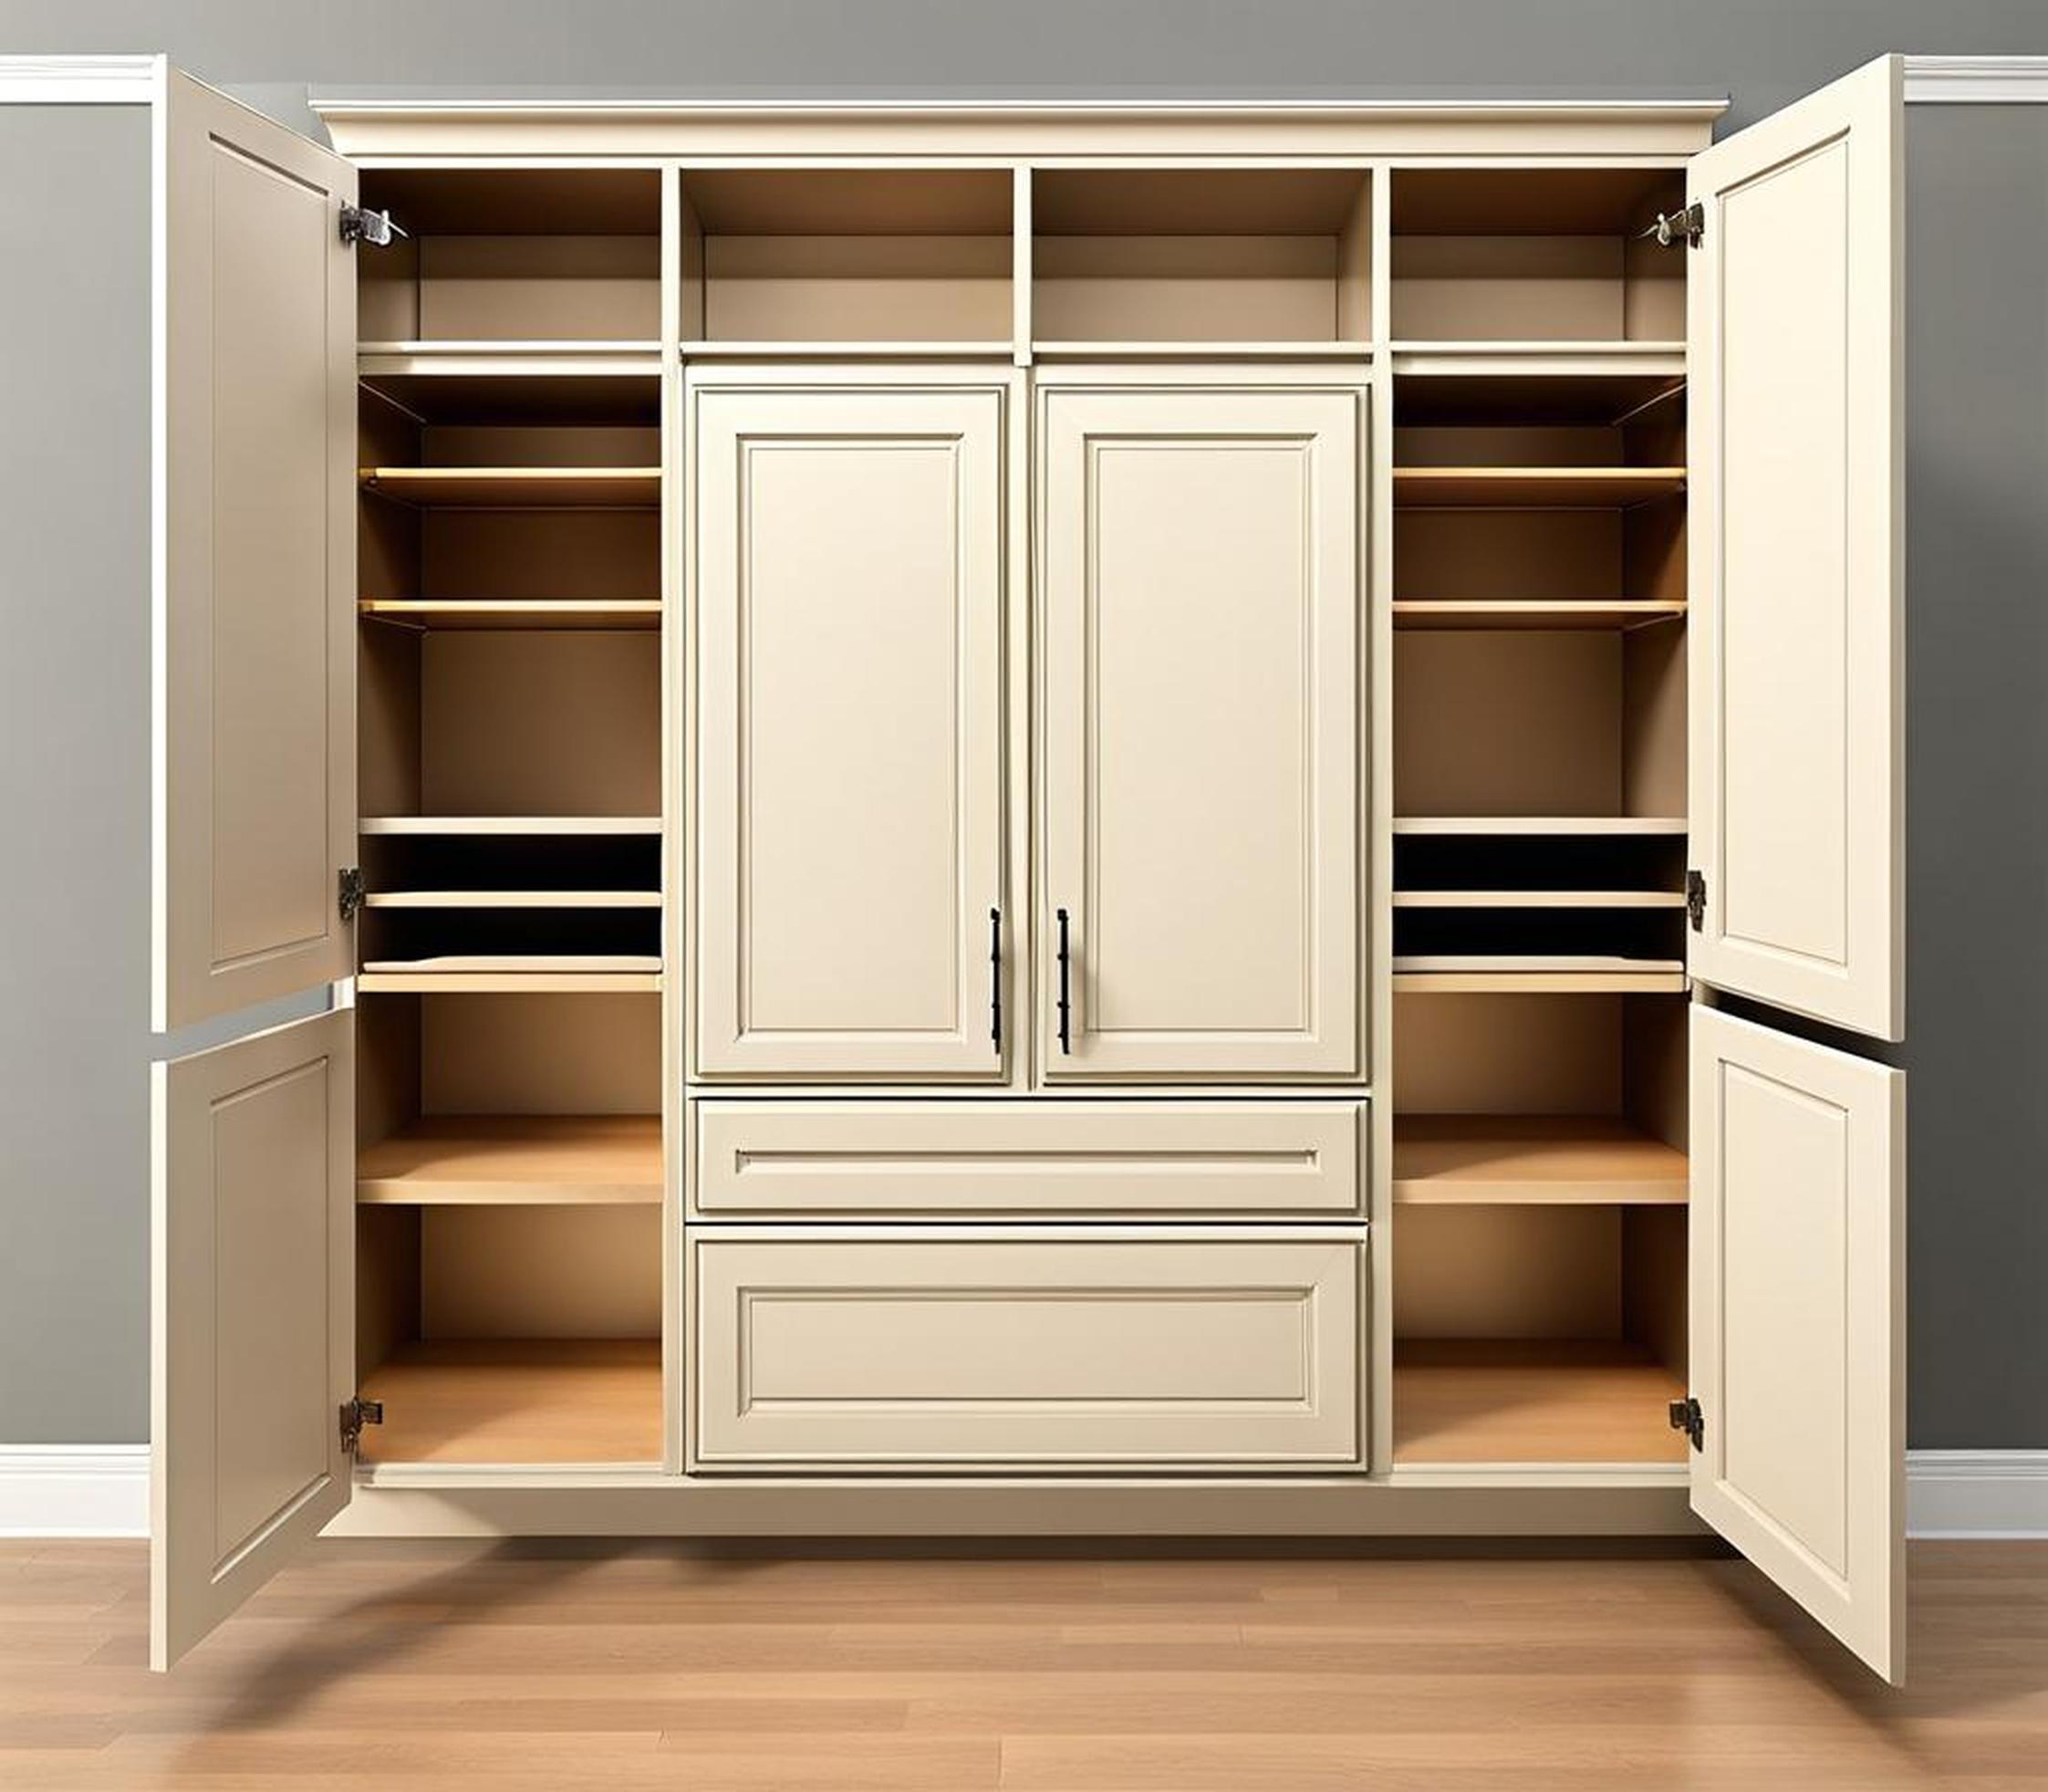 size of pantry cabinet